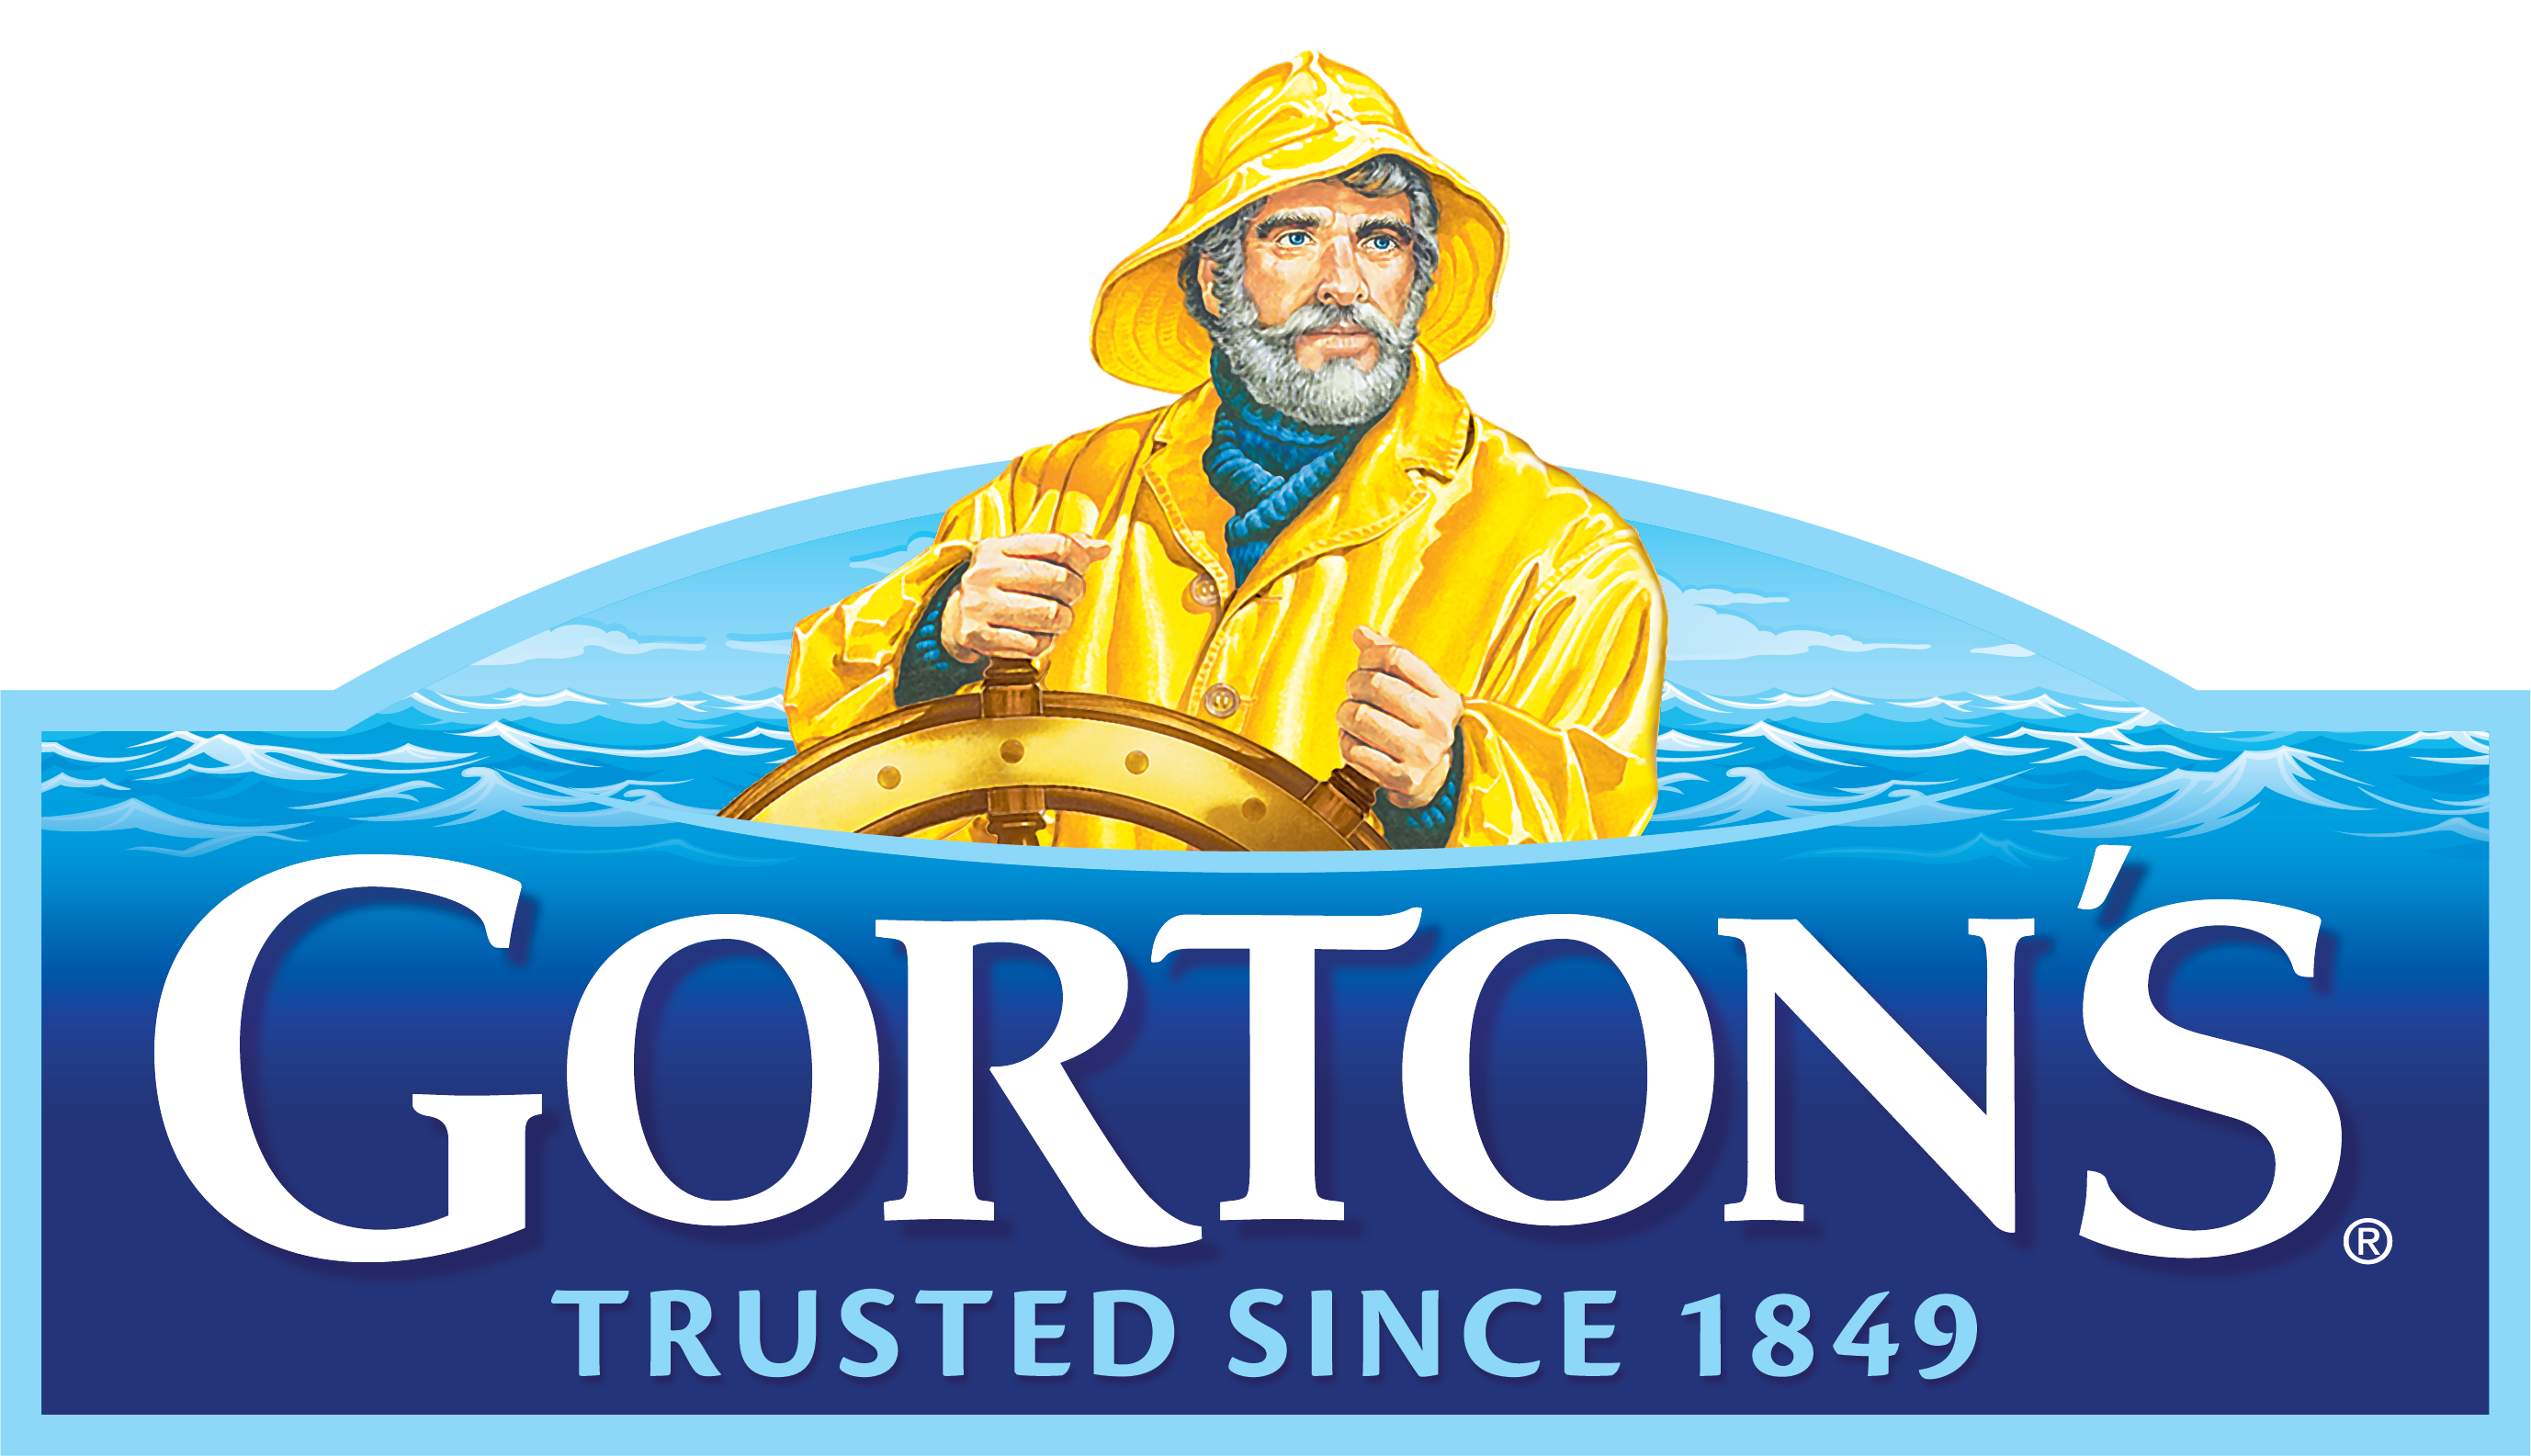 Gorton’s Seafood Refreshes Logo, Product Packaging After Vast Consumer Research